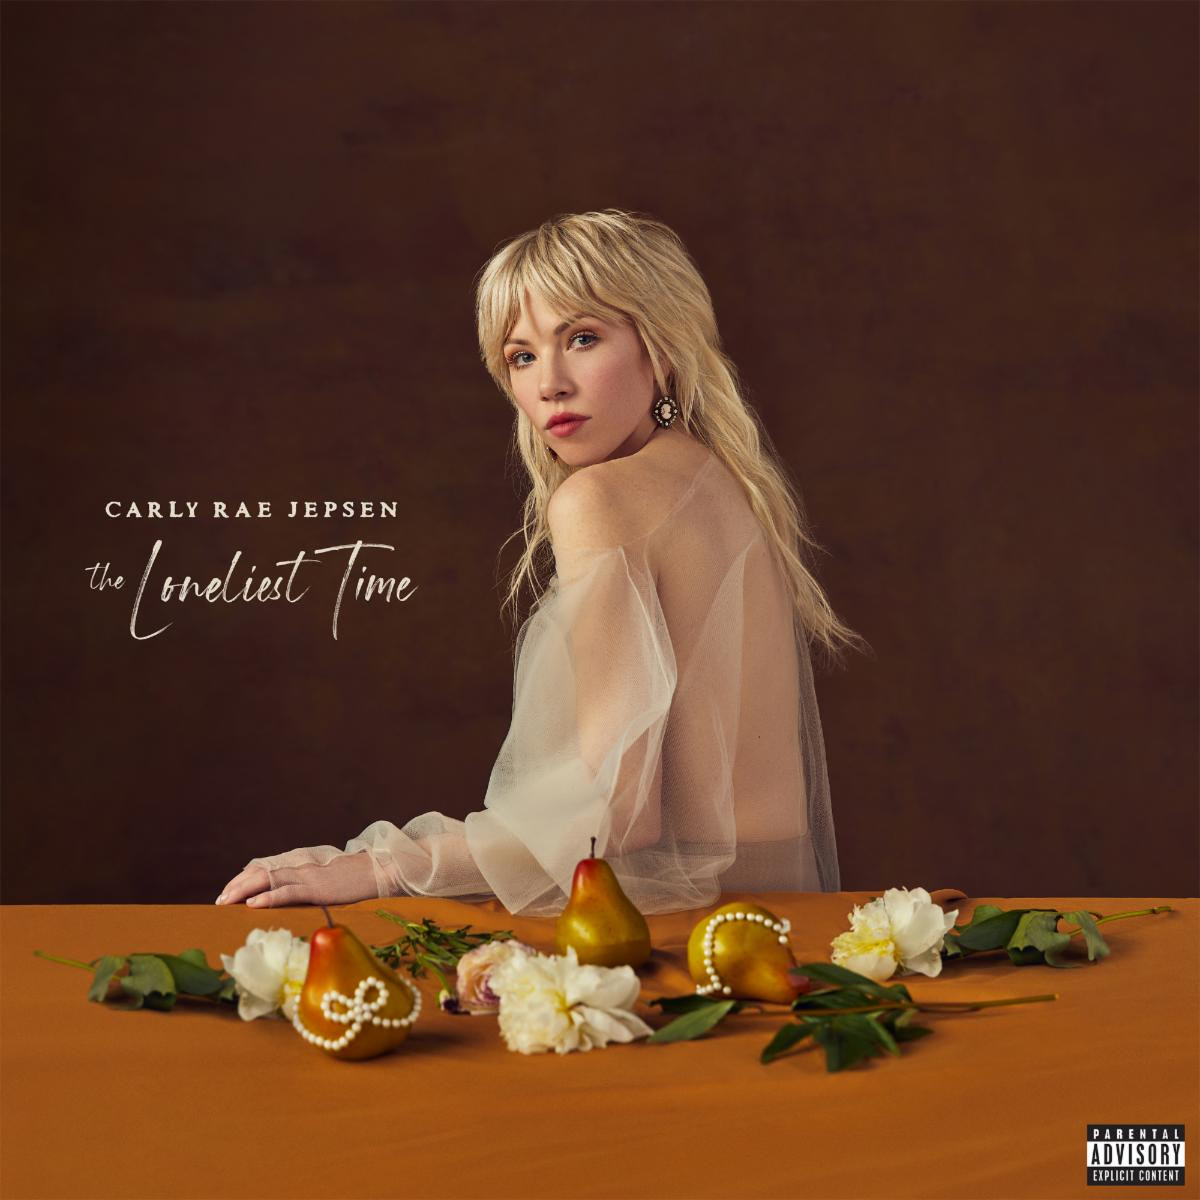 Carly Rae Jepsen Announces New Album ‘The Loneliest Time’ Due Out October 21